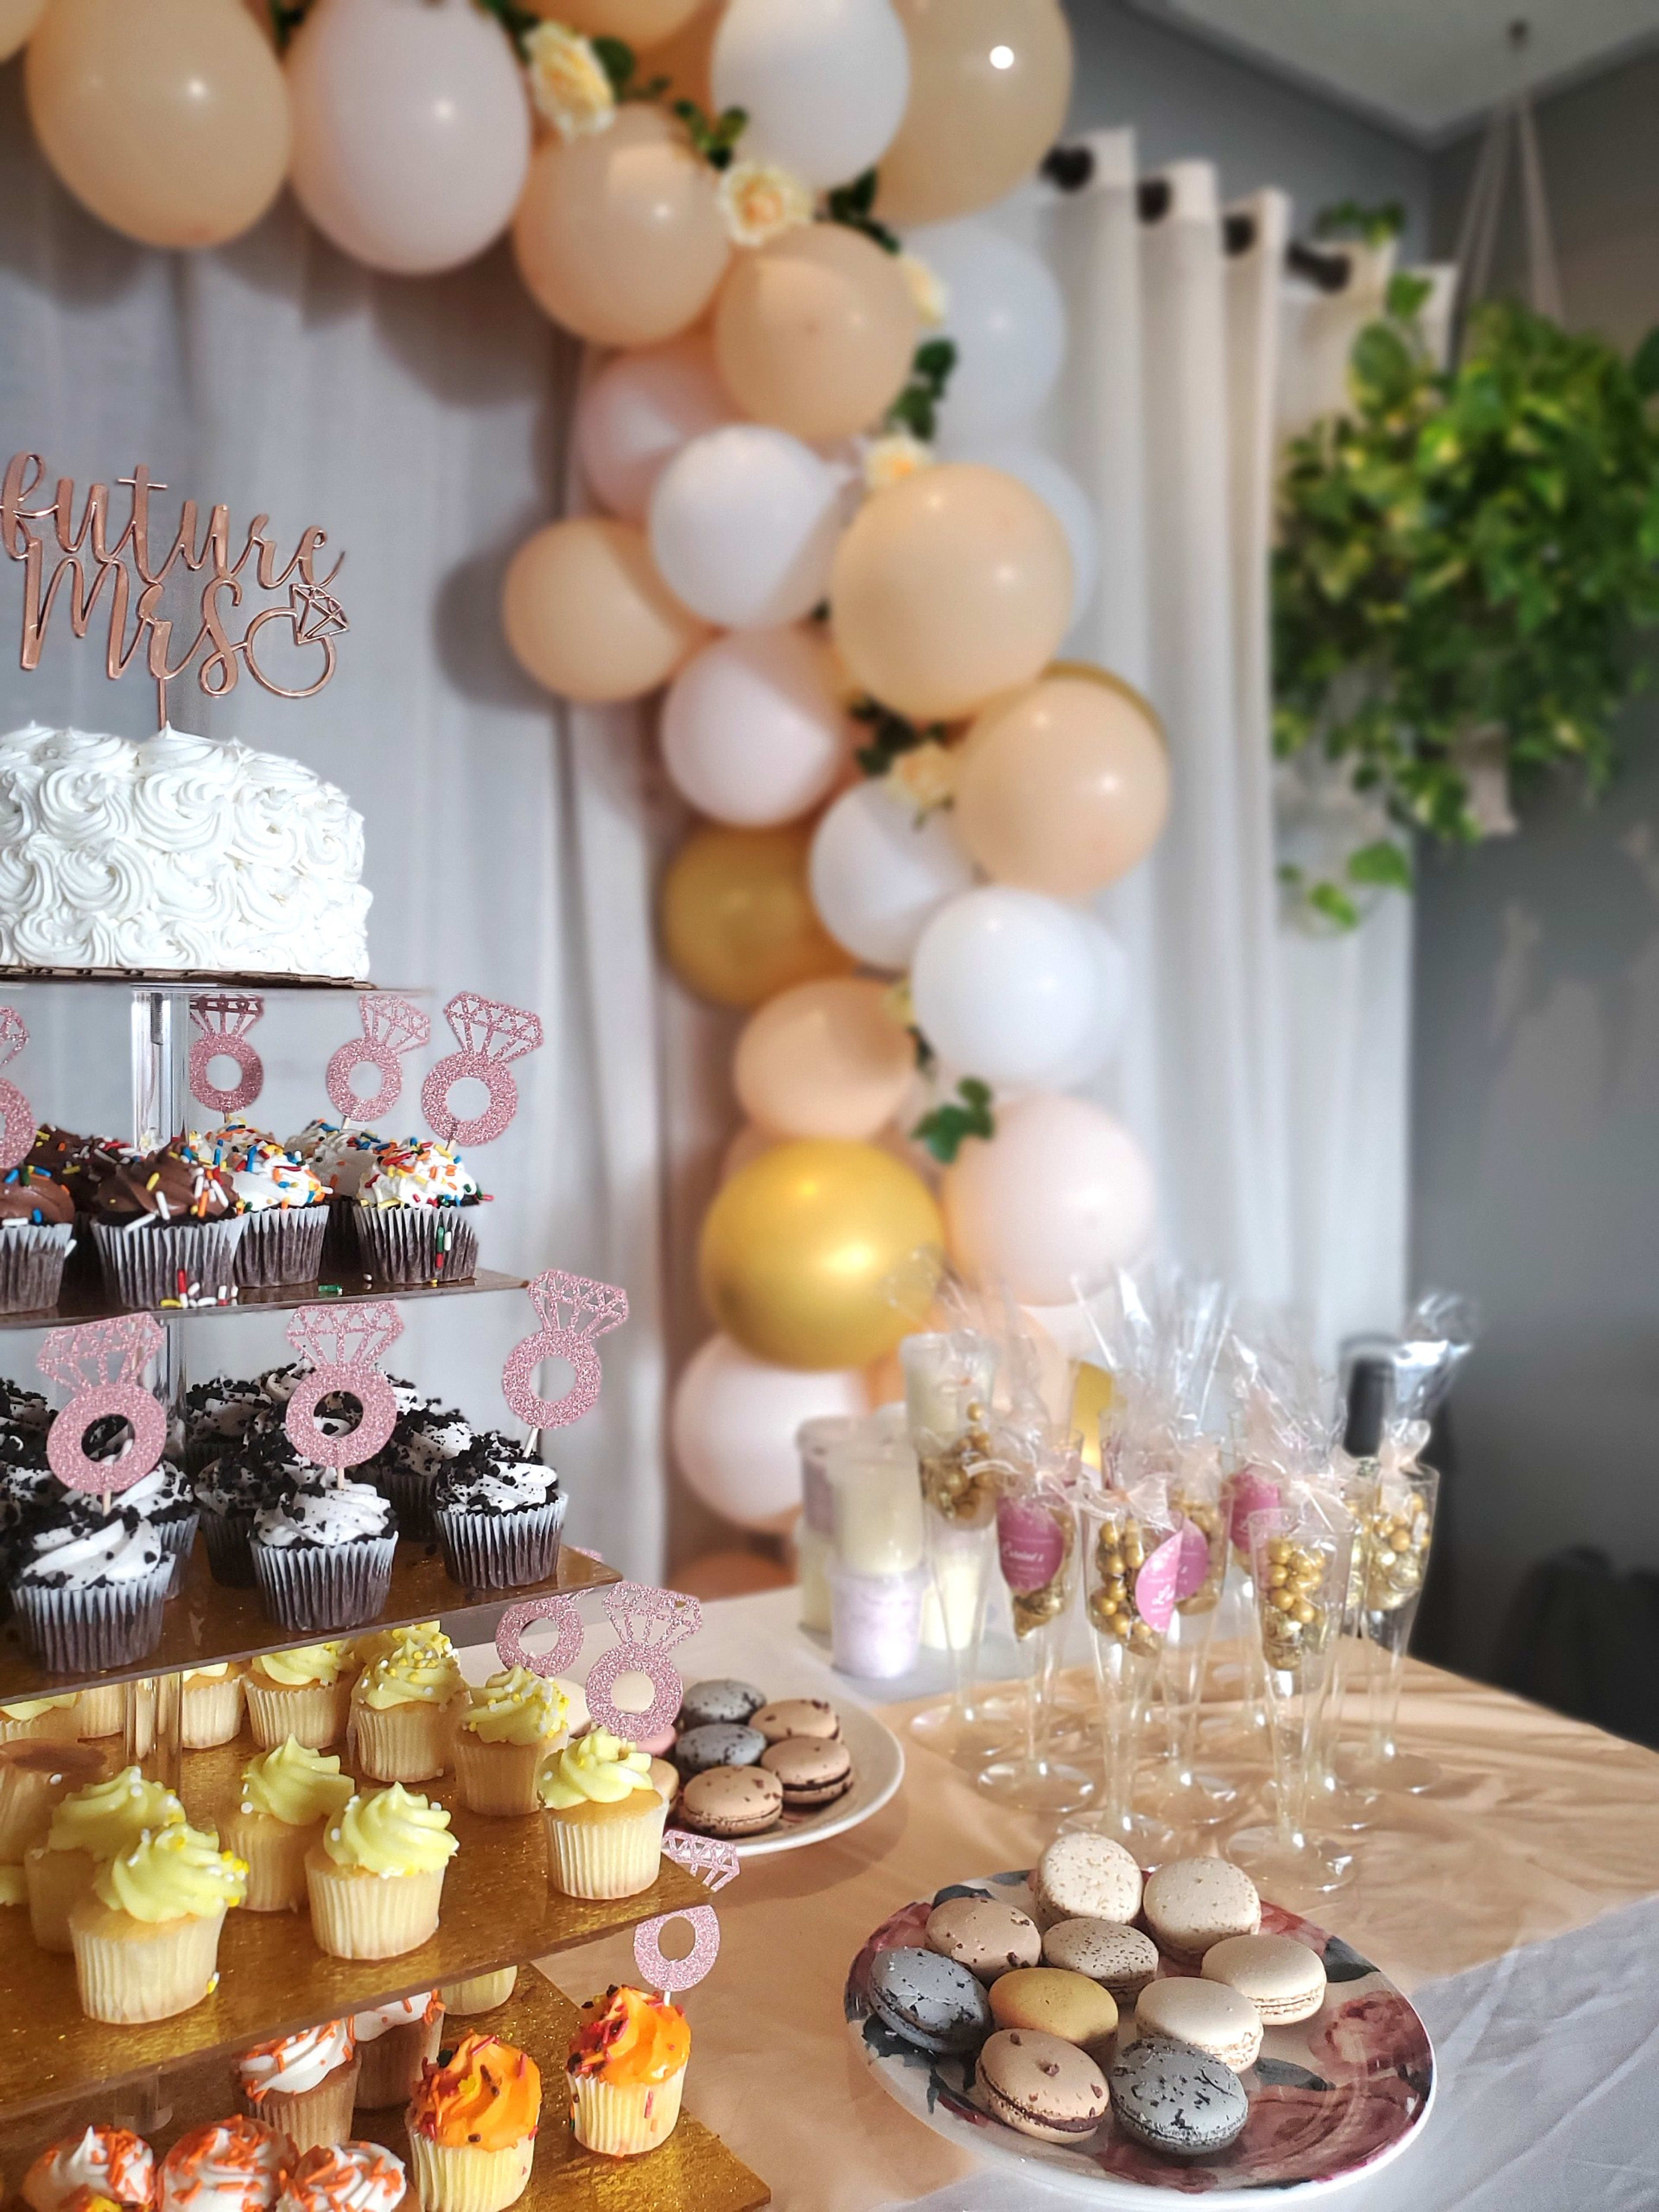 A bridal shower table adorned with an abundance of colourful cupcakes and snacks.